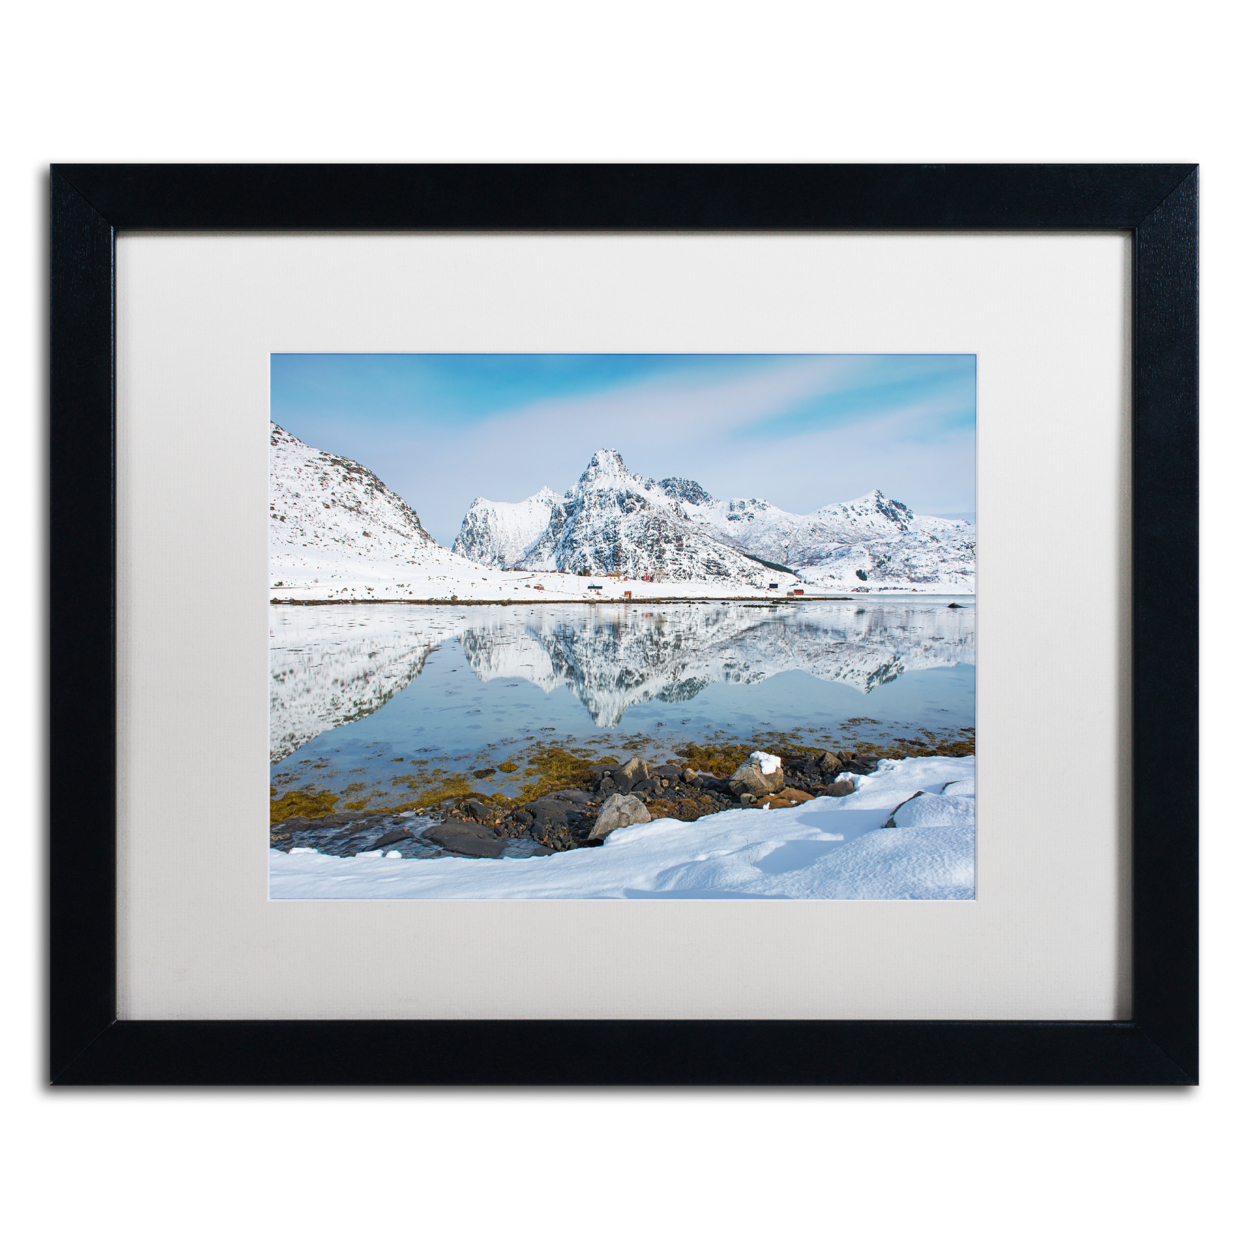 Michael Blanchette Photography 'Fjord Reflection' Black Wooden Framed Art 18 X 22 Inches